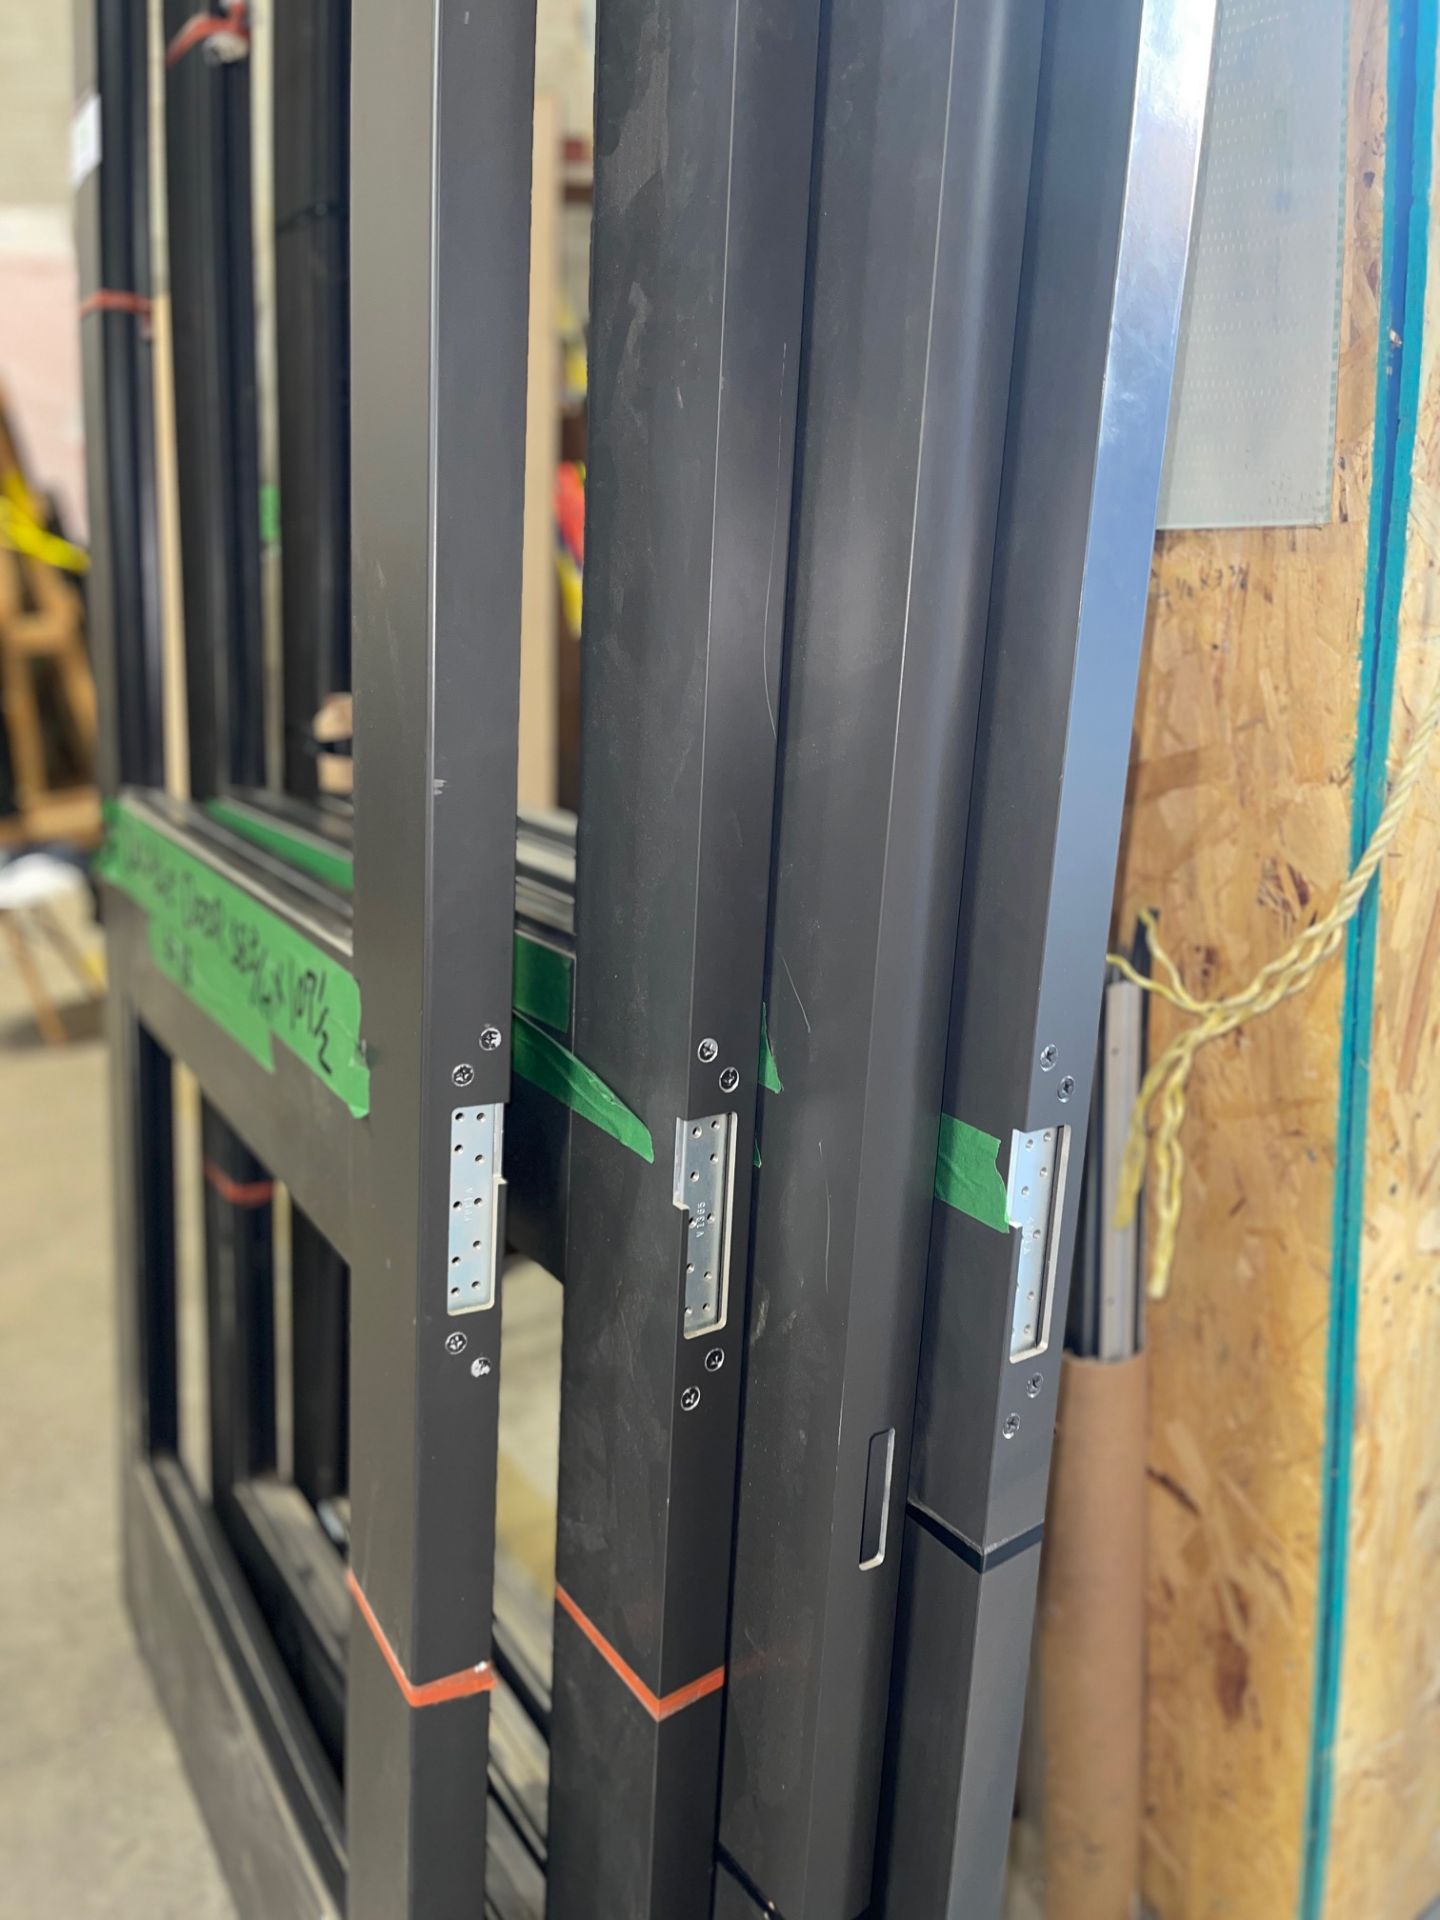 TWO SETS OF DOUBLE DOORS 38 3/4" X 107 1/2", RIGGING $25 - Image 3 of 4